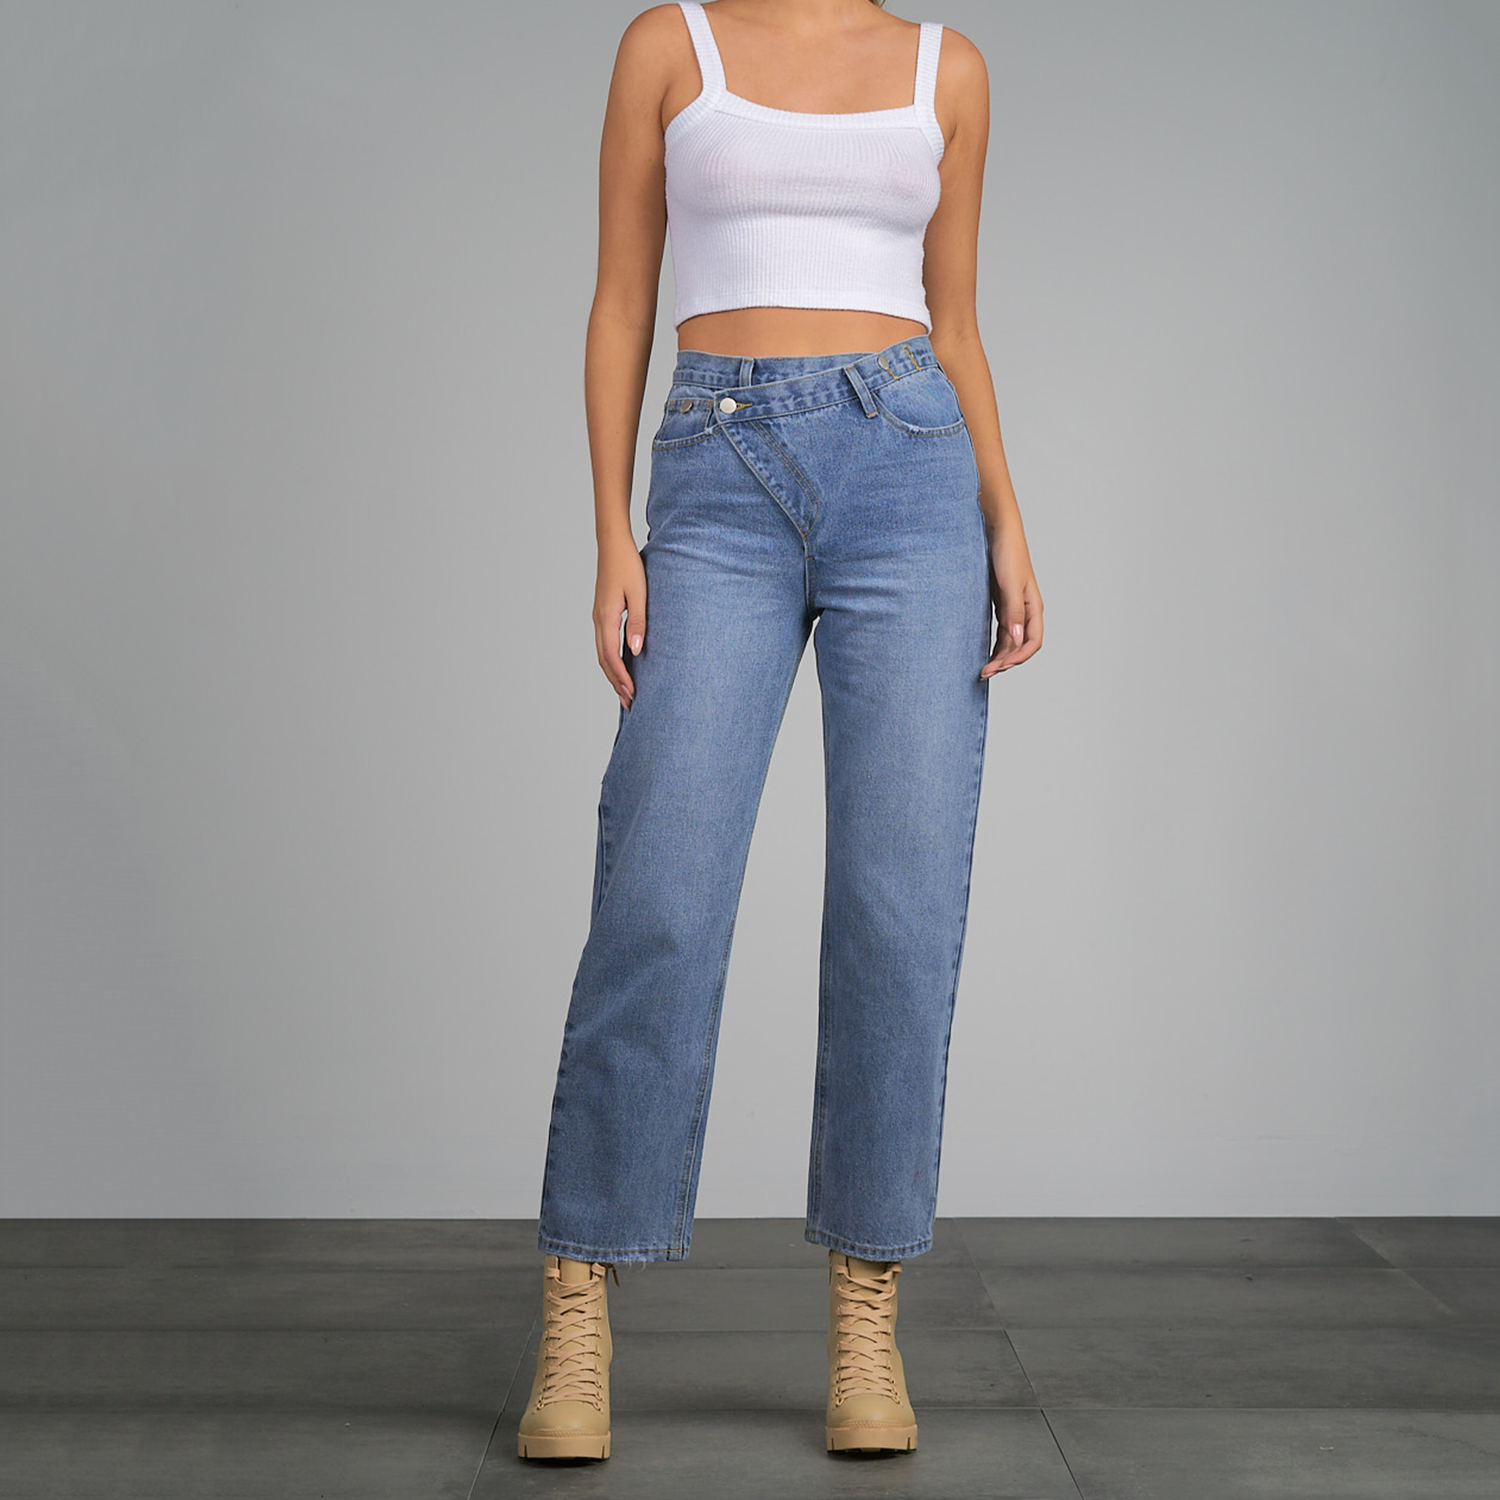 Elan Hi Waist Overlap Jean. These fun jean features an asymmetrical overlap front for a modern edge. Made in a soft all-cotton material, this trendy silhouette has a boyfriend fit and can easily be dressed up or down